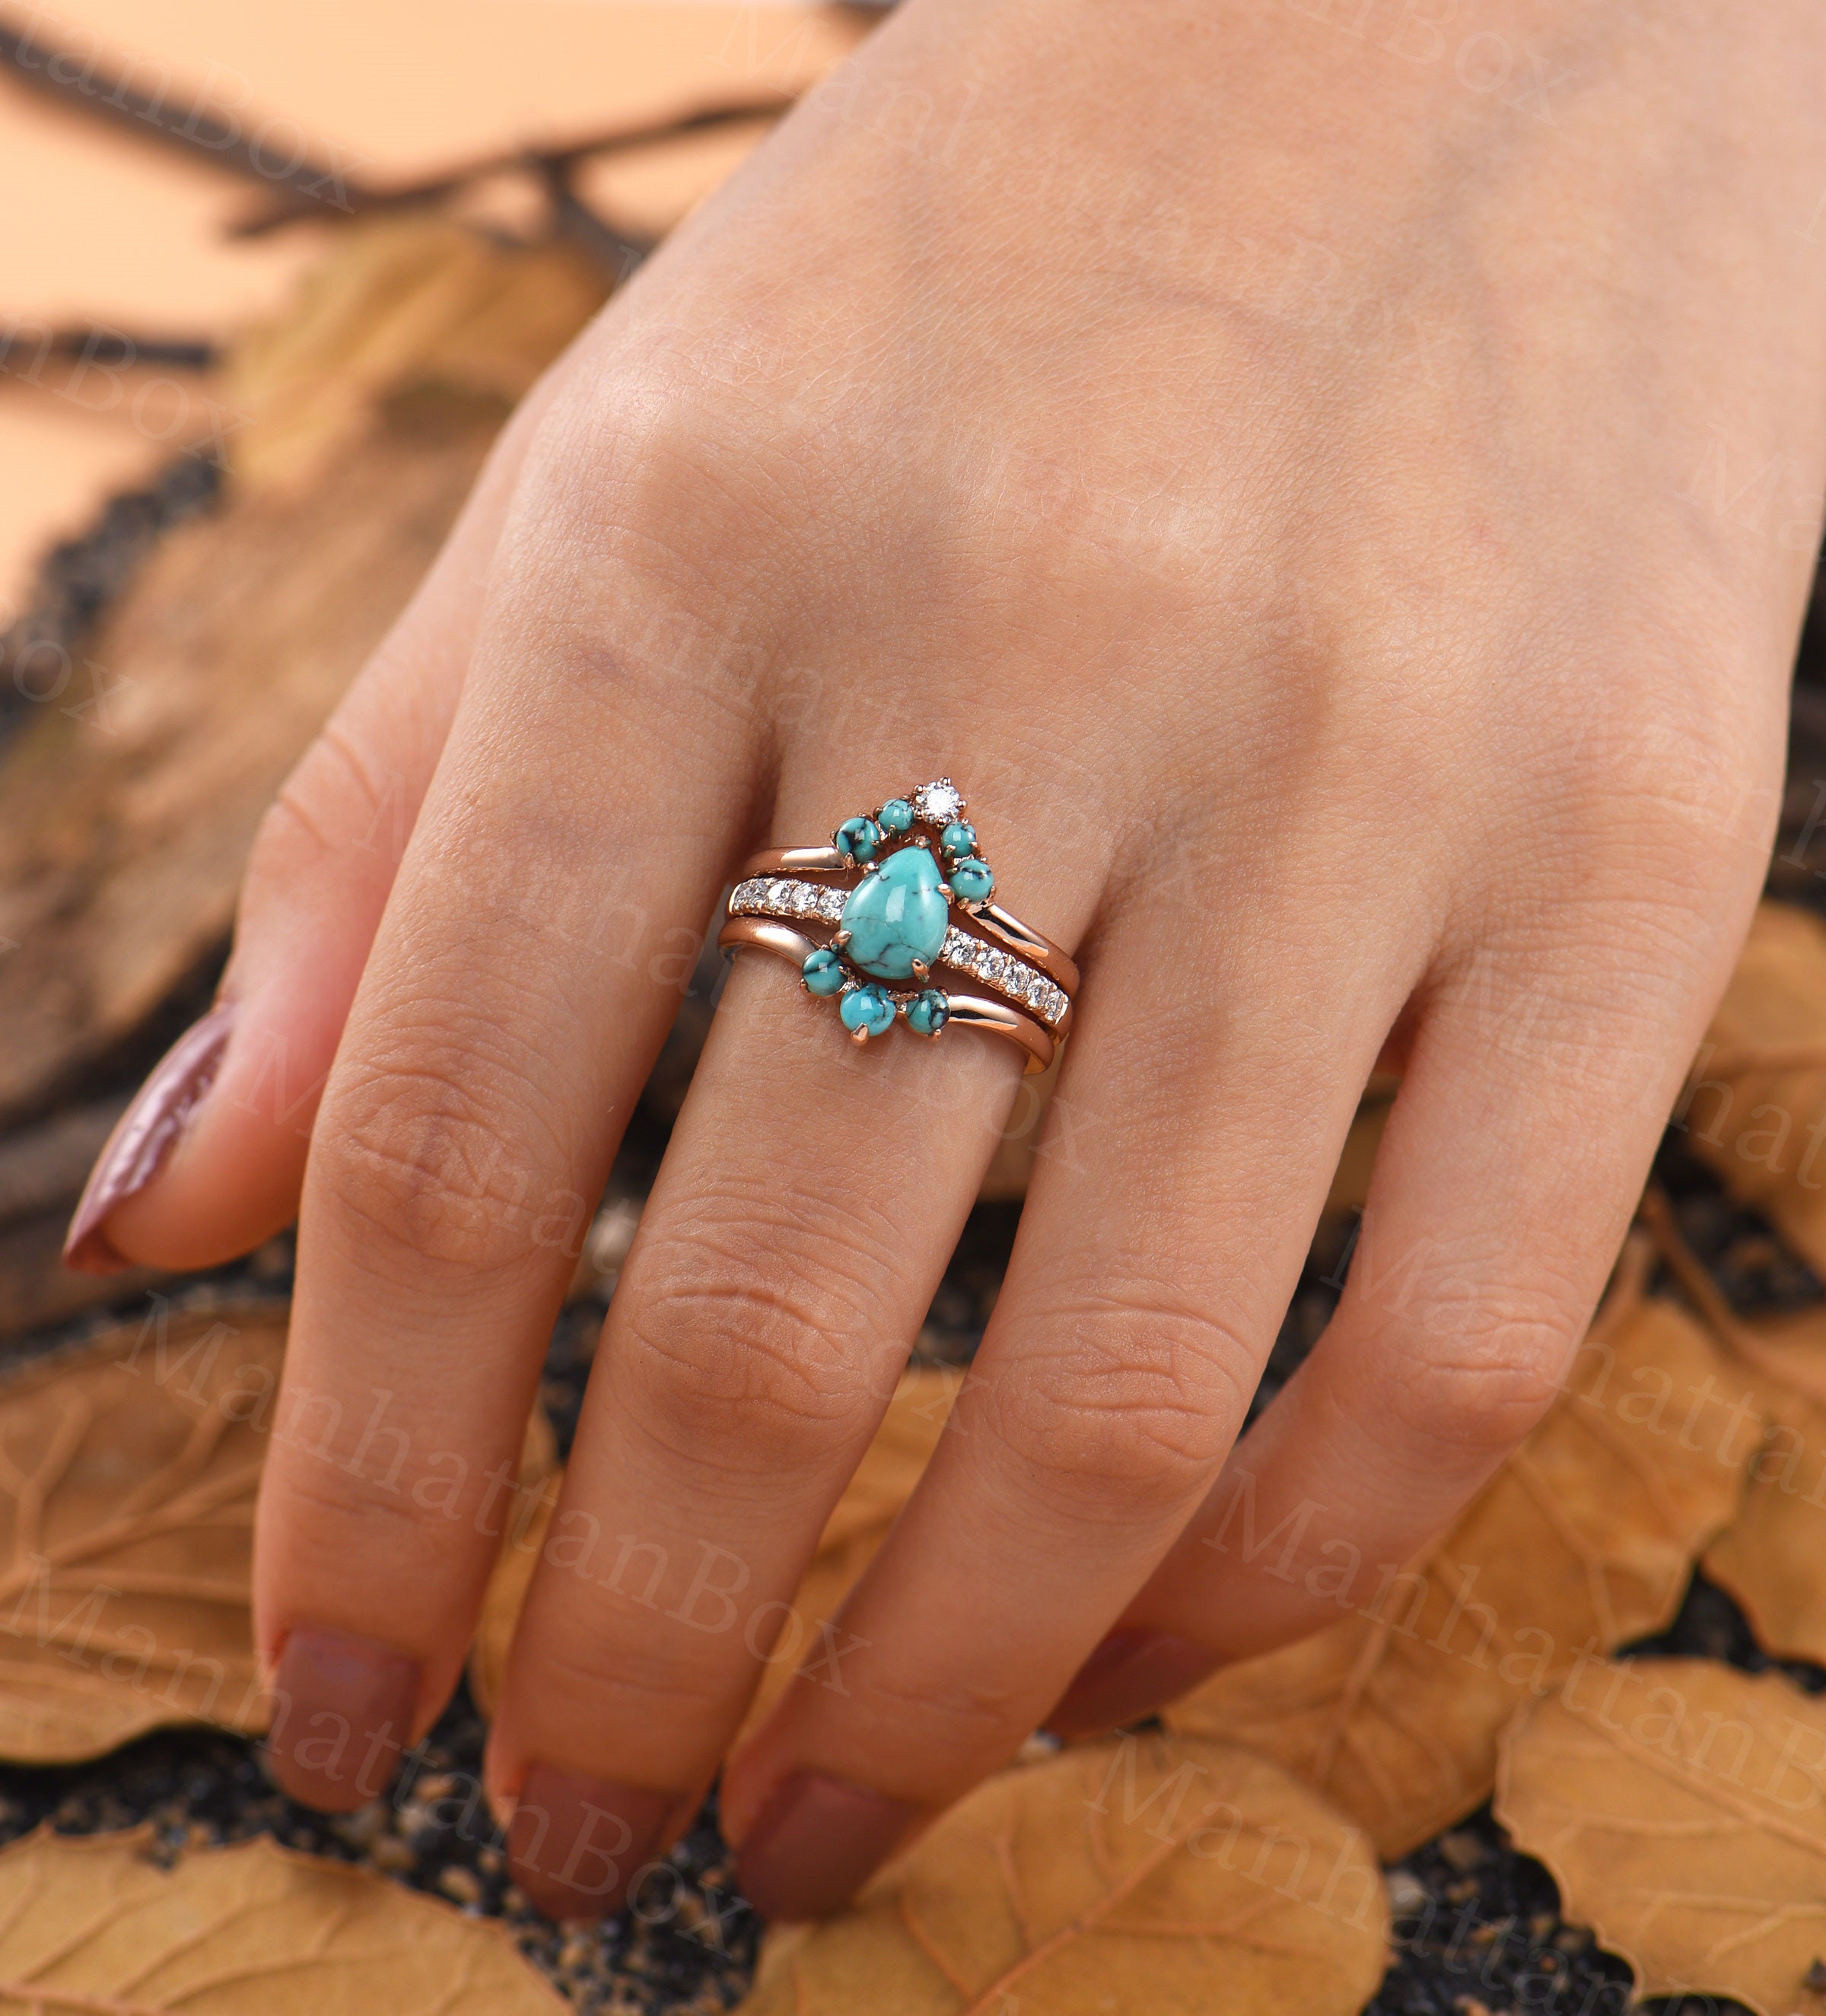 Haluoo Vintage Aquamarine Ring Sterling Silver Gemstone Turquoise Engagement Wedding Bands Emerald Cut Blue Rose Gold Jewelry for Lovers Size 6-10 